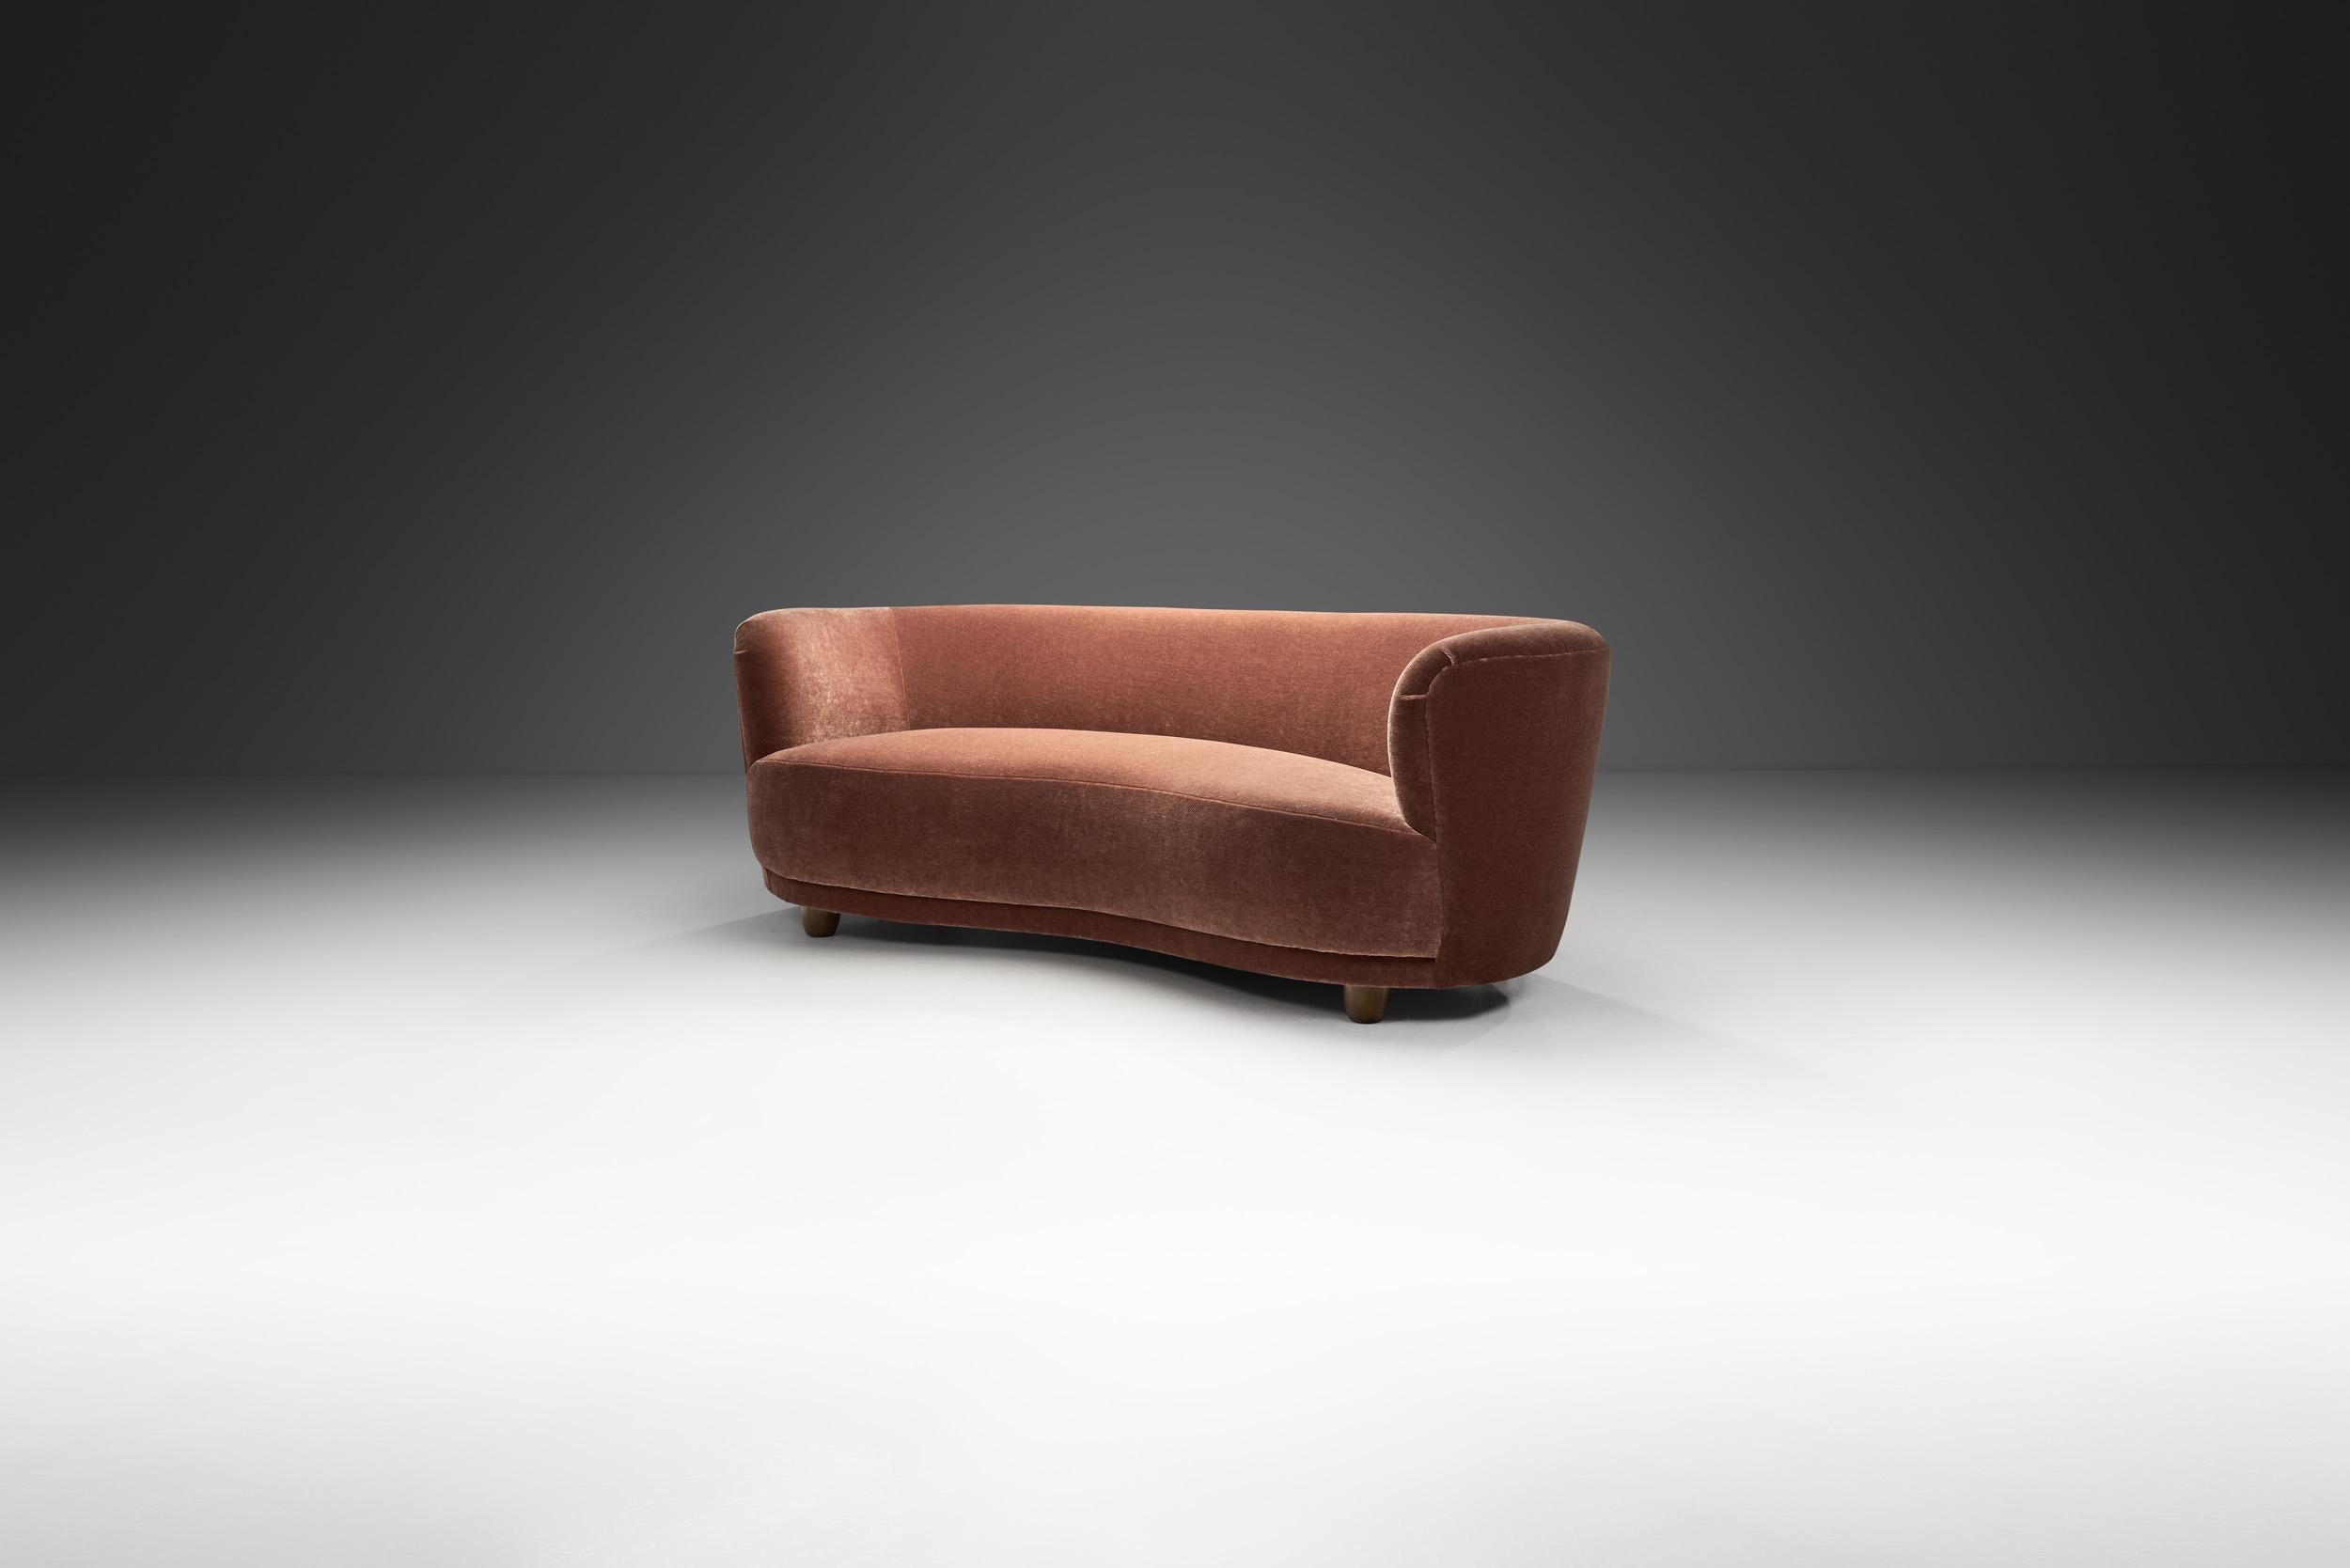 This beautiful Danish three-seater sofa recalls the Art Deco style of the 1930s with the recognizable touch of Danish Modernism. Thanks to its elegantly curved shape, this type of sofa is often referred to as the “banana” style, which not only